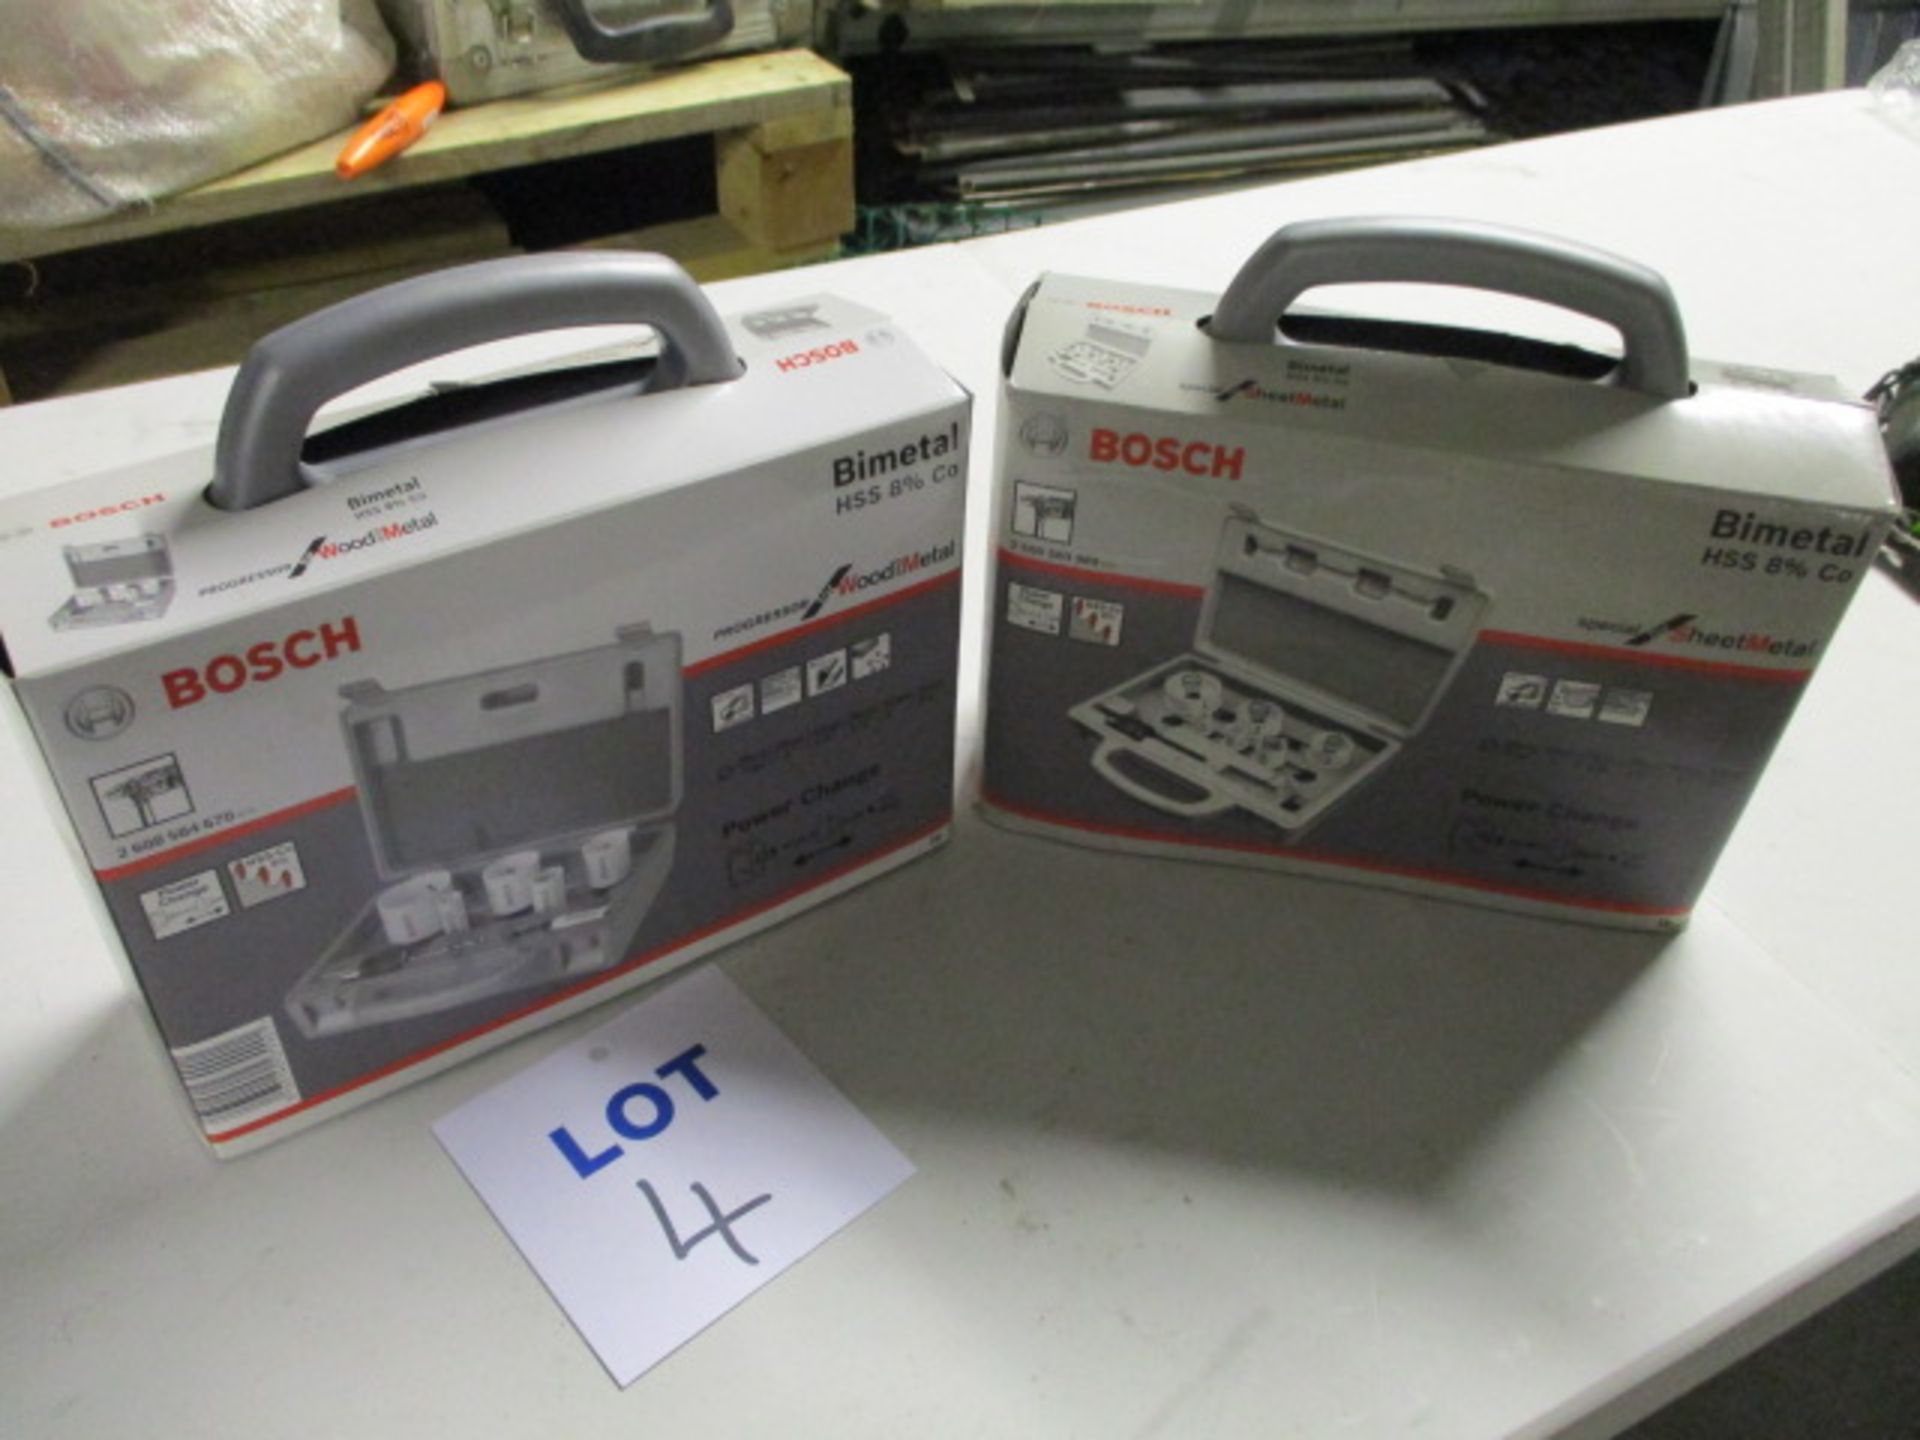 (2 Sets) Bosch Unused Power Charge HSS Bimetal Holesaws in Cases - Image 4 of 4